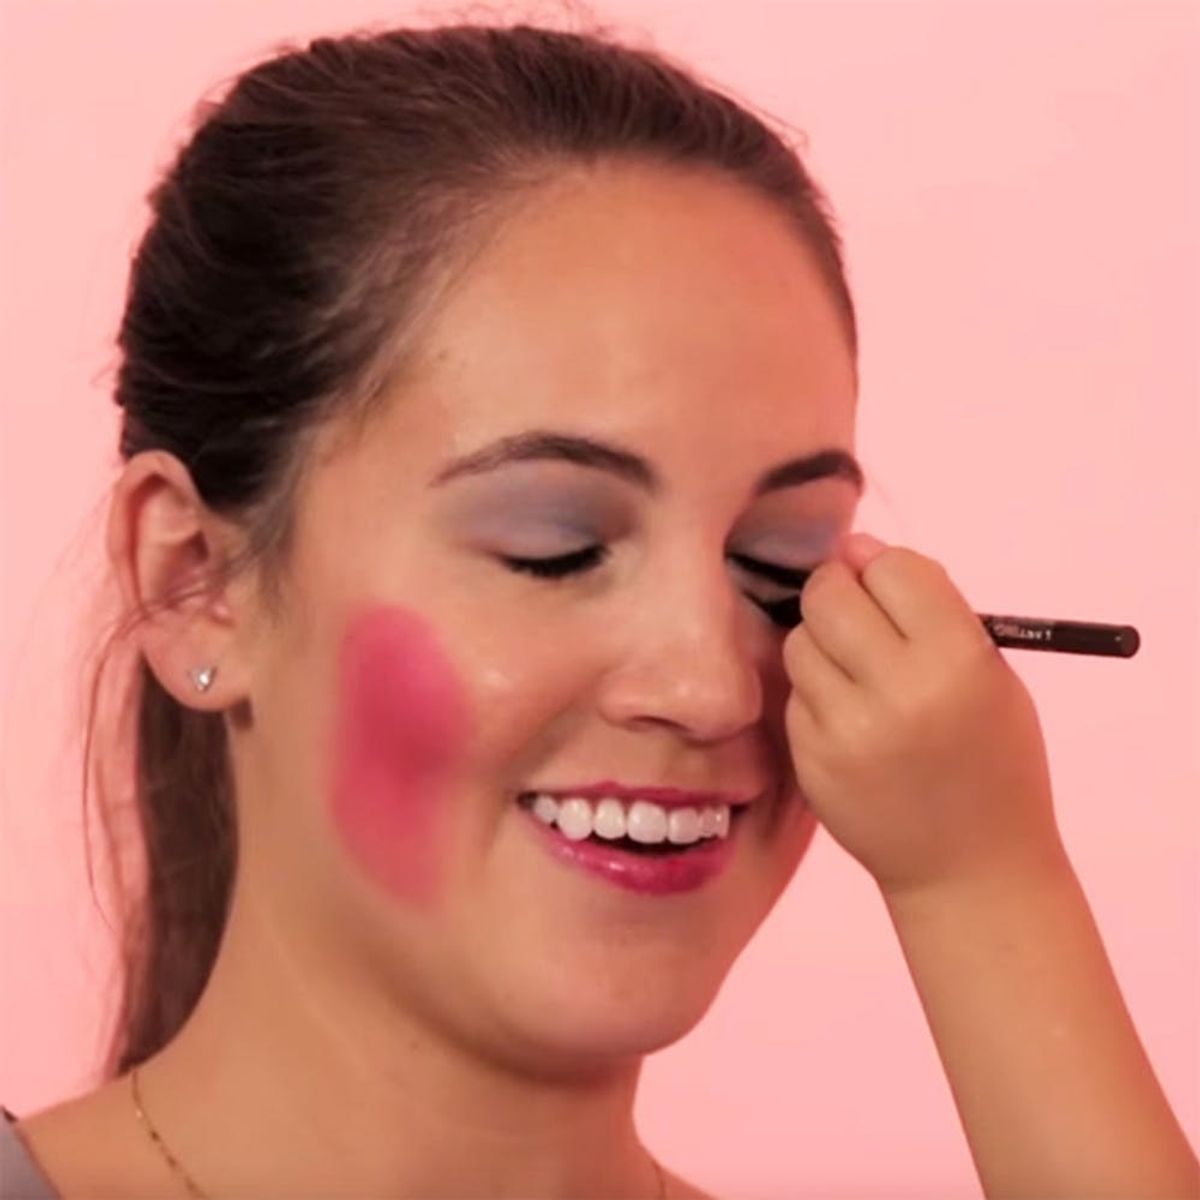 Watch Little Girls Help Women Get Ready for a Date + More for Your Commute